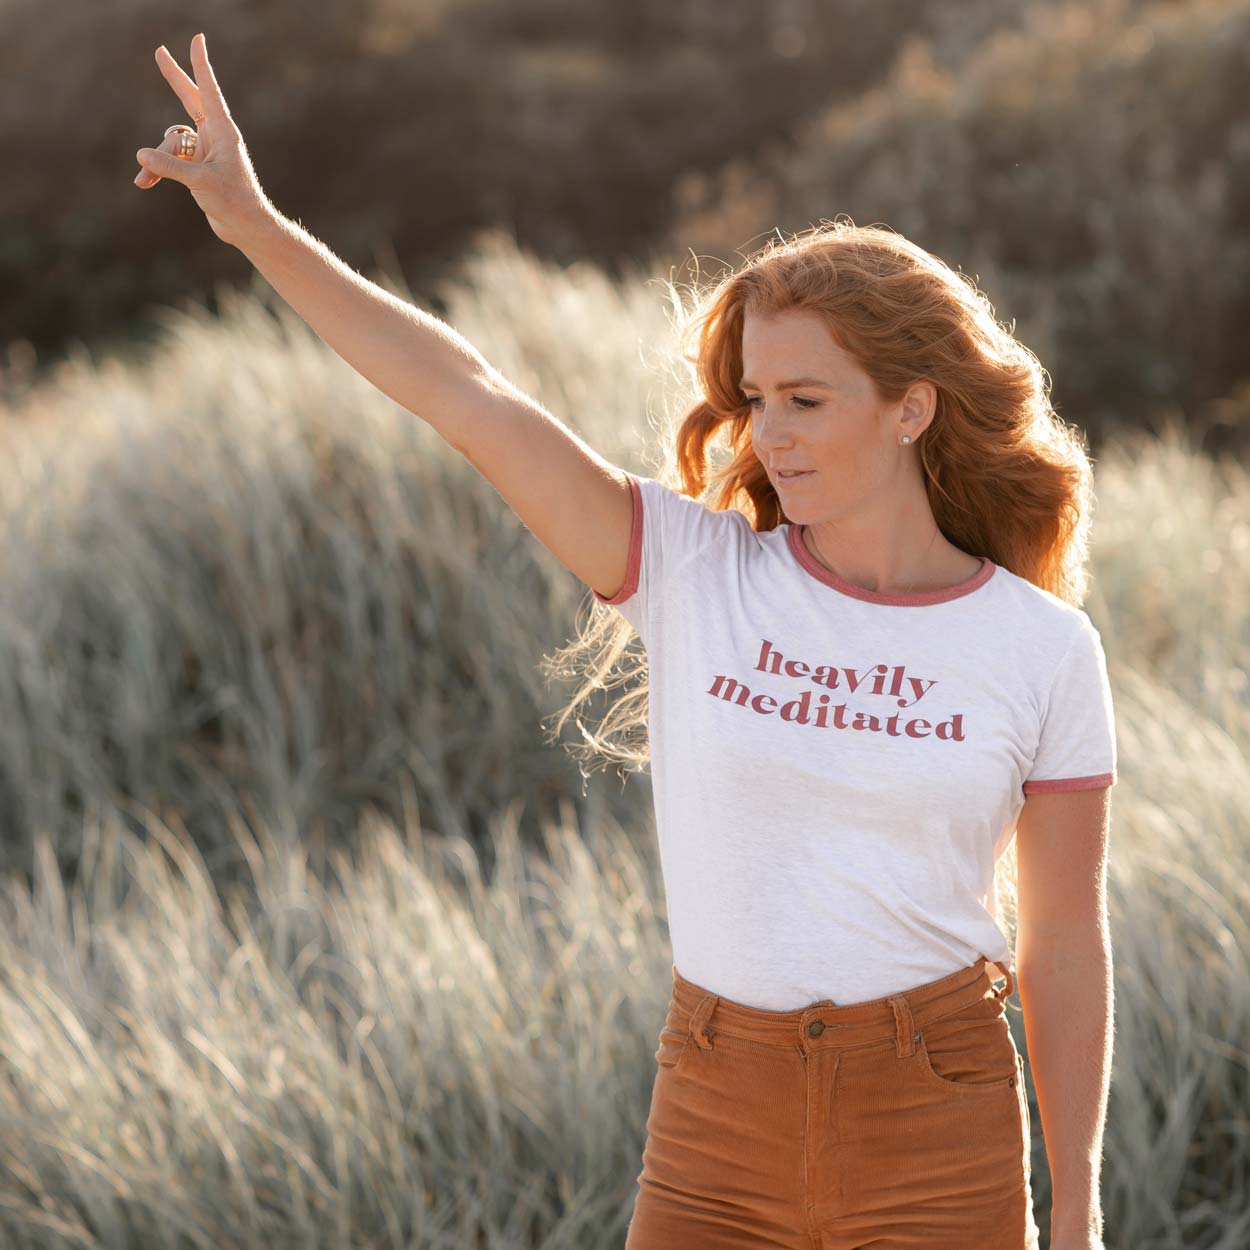 Caitlin Cady standing in front of beach dunes, wearing a Heavily Meditated shirt, her hand raised in a peace sign